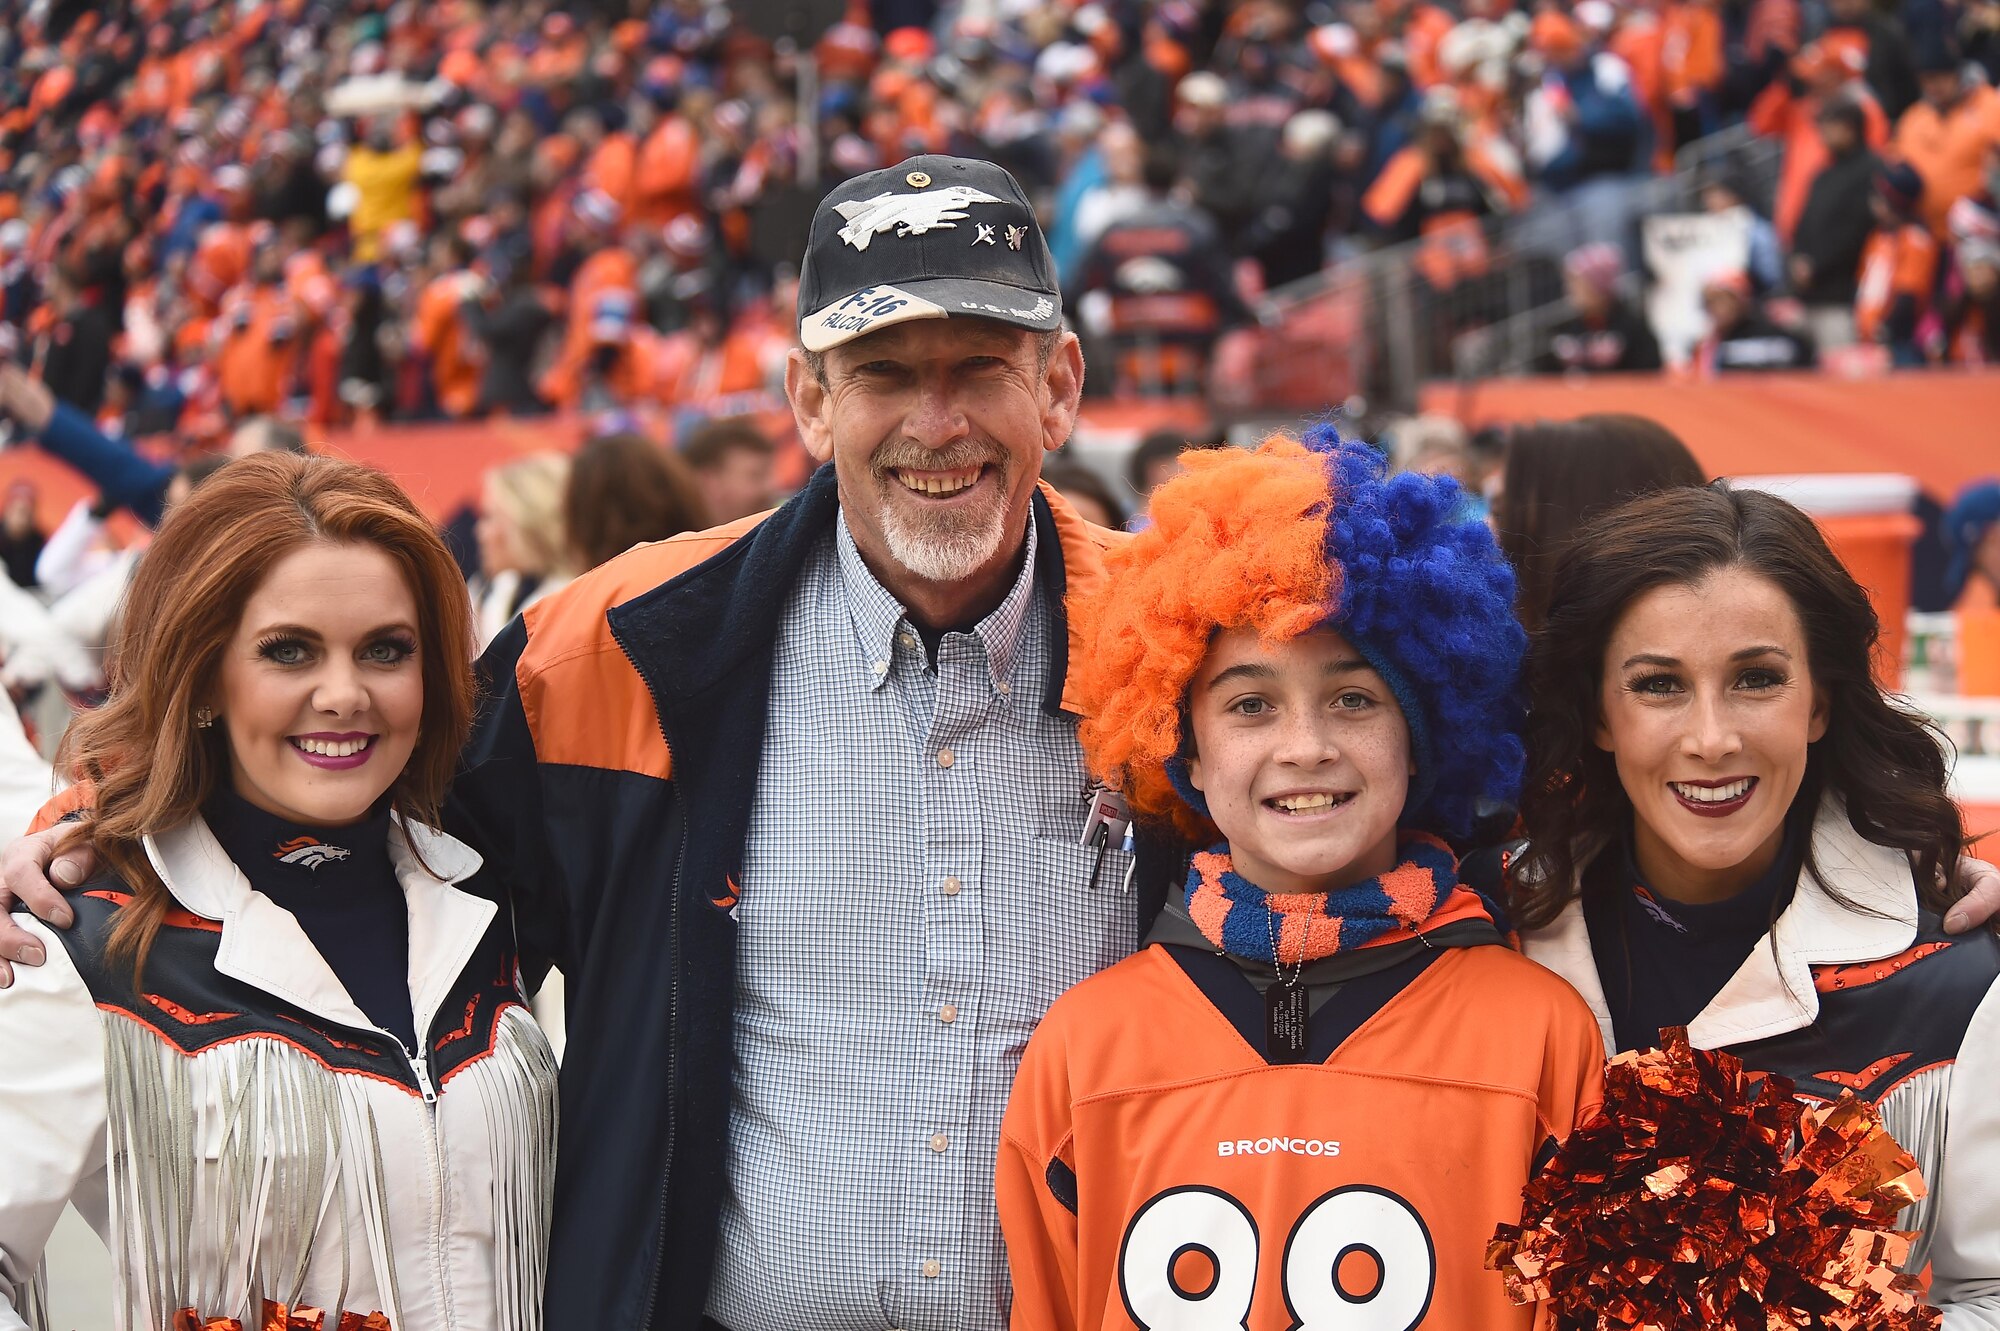 The family of Capt. William H. DuBois, a pilot who tragically lost his life while deployed, was honored before the Denver Broncos playoff game Jan. 11, 2015, at Sports Authority Field in Denver with the presentation of the game ball before the opening kickoff. (U.S. Air Force photo by Airman 1st Class Luke W. Nowakowski/Released)